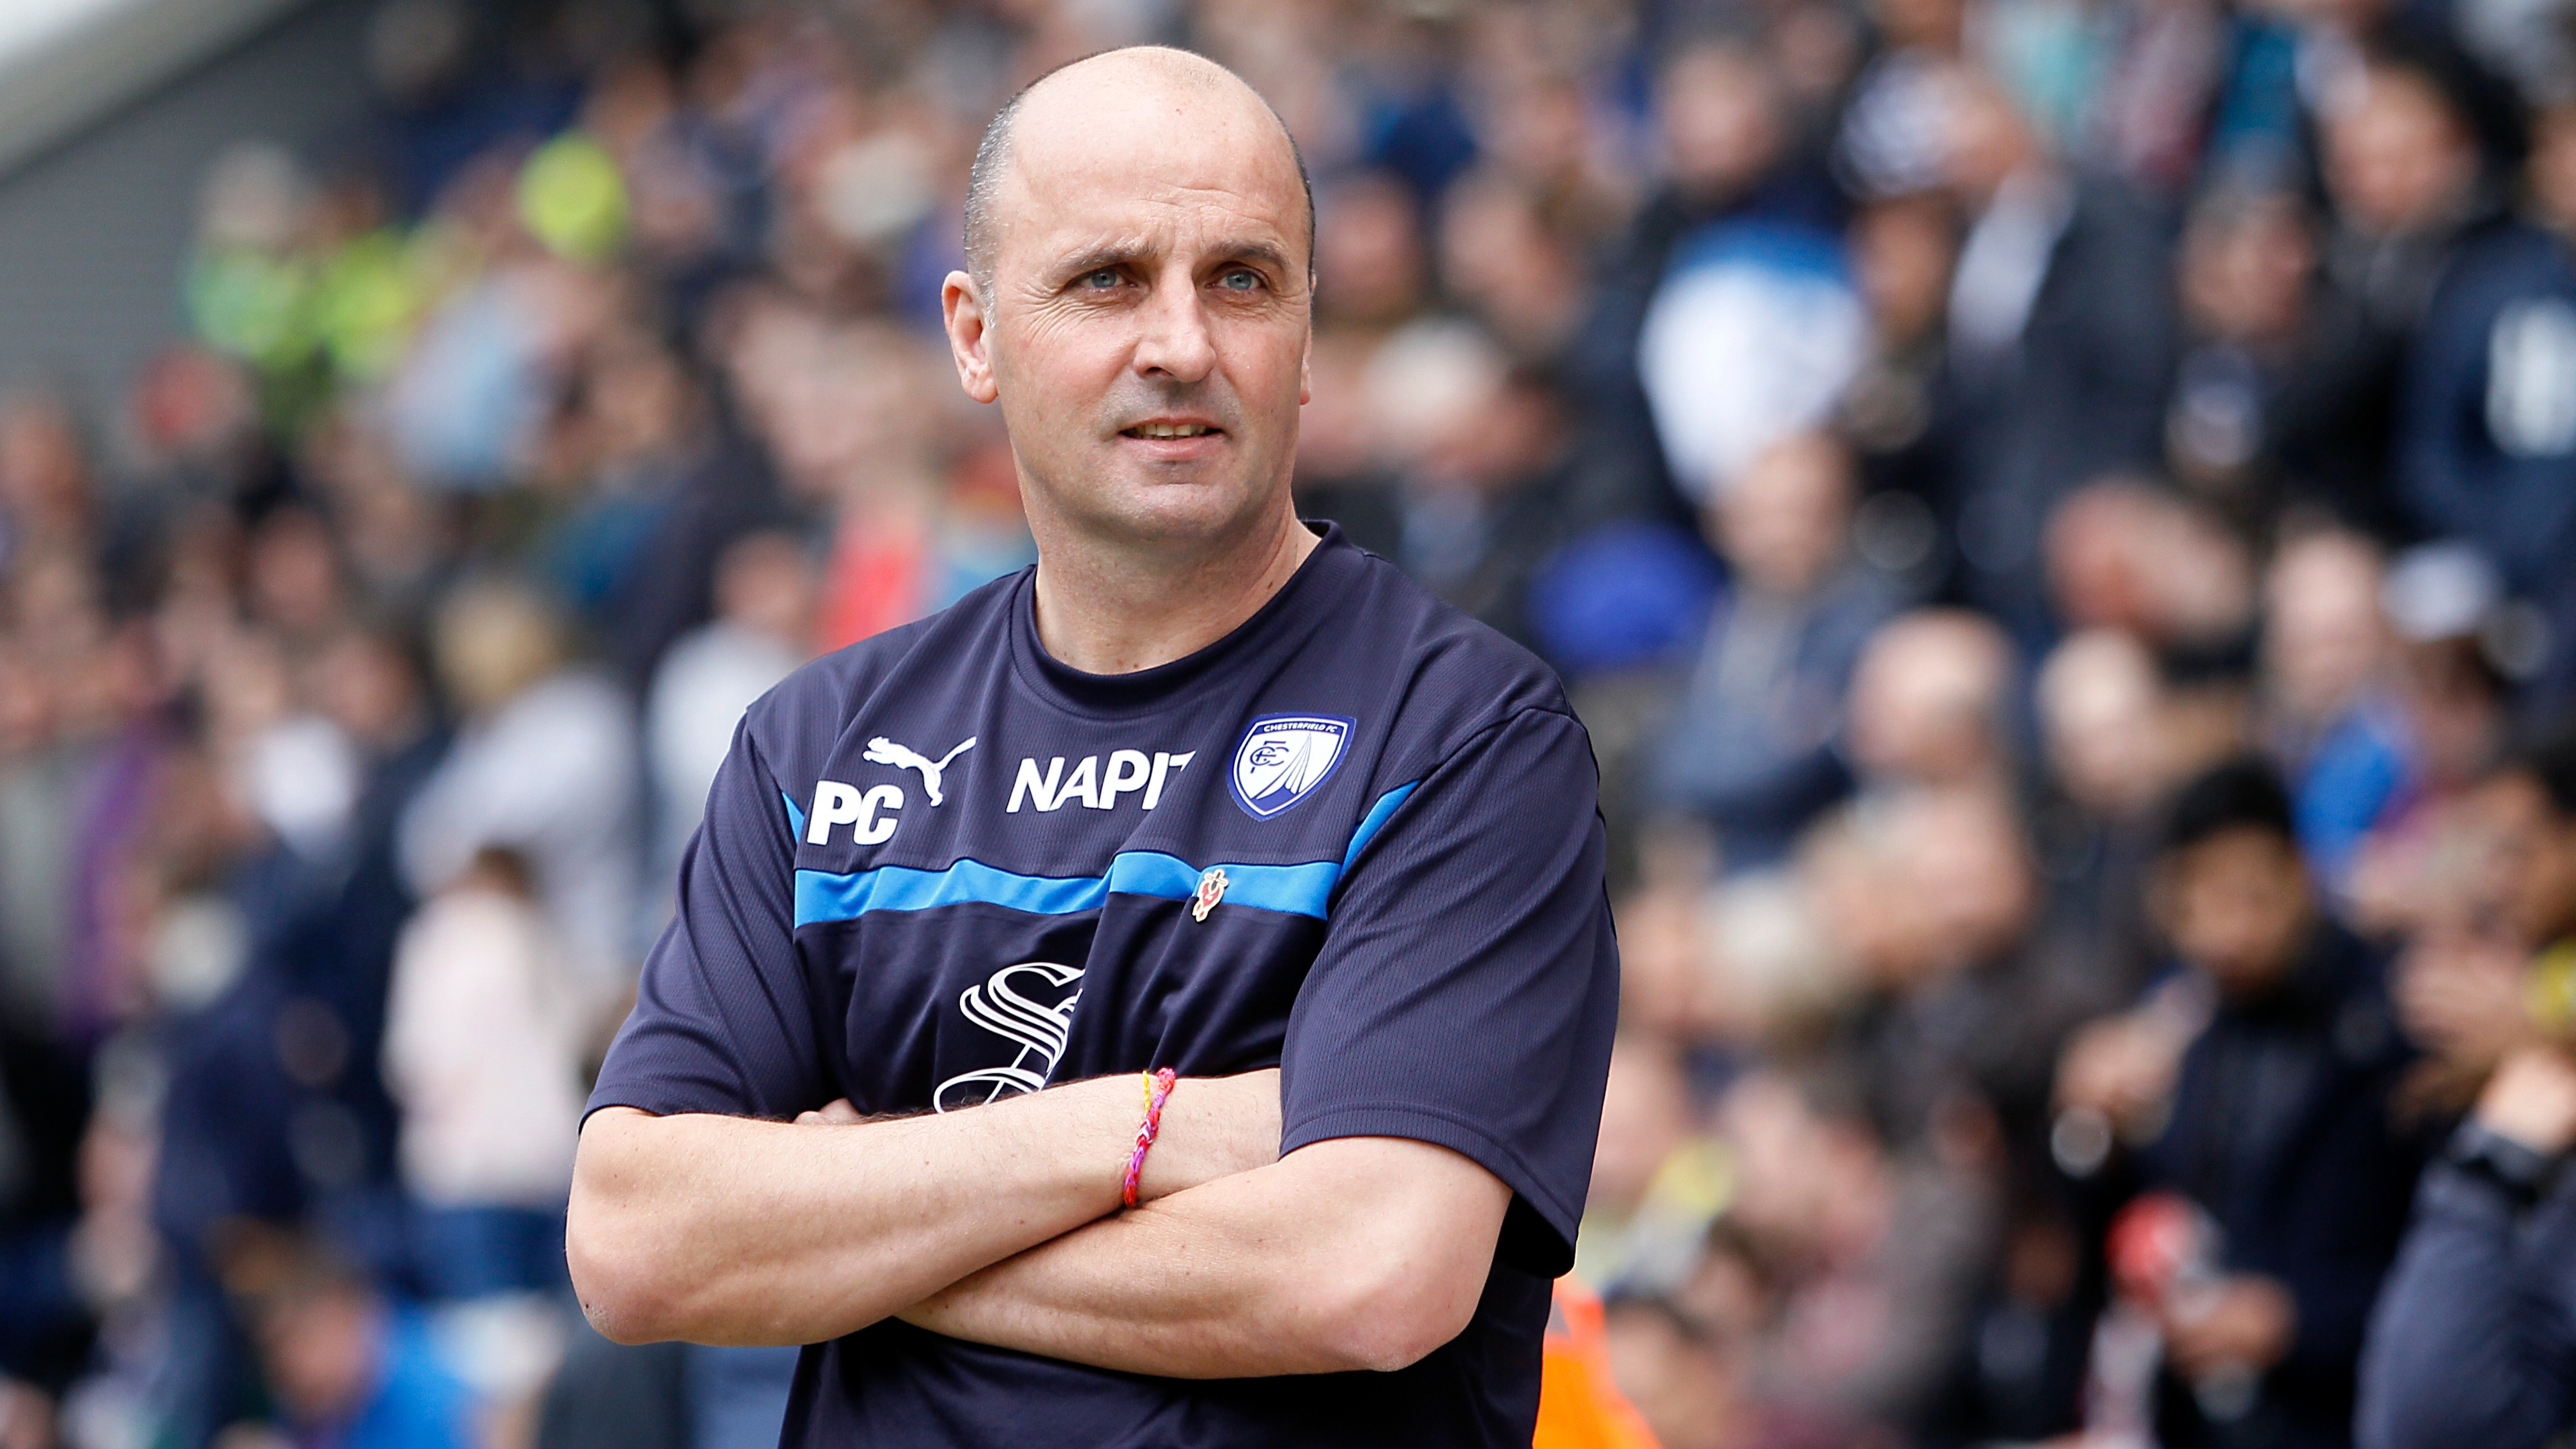 Paul Cook returns to Chesterfield FC after James Rowe leaves following  'misconduct' probe | ITV News Calendar